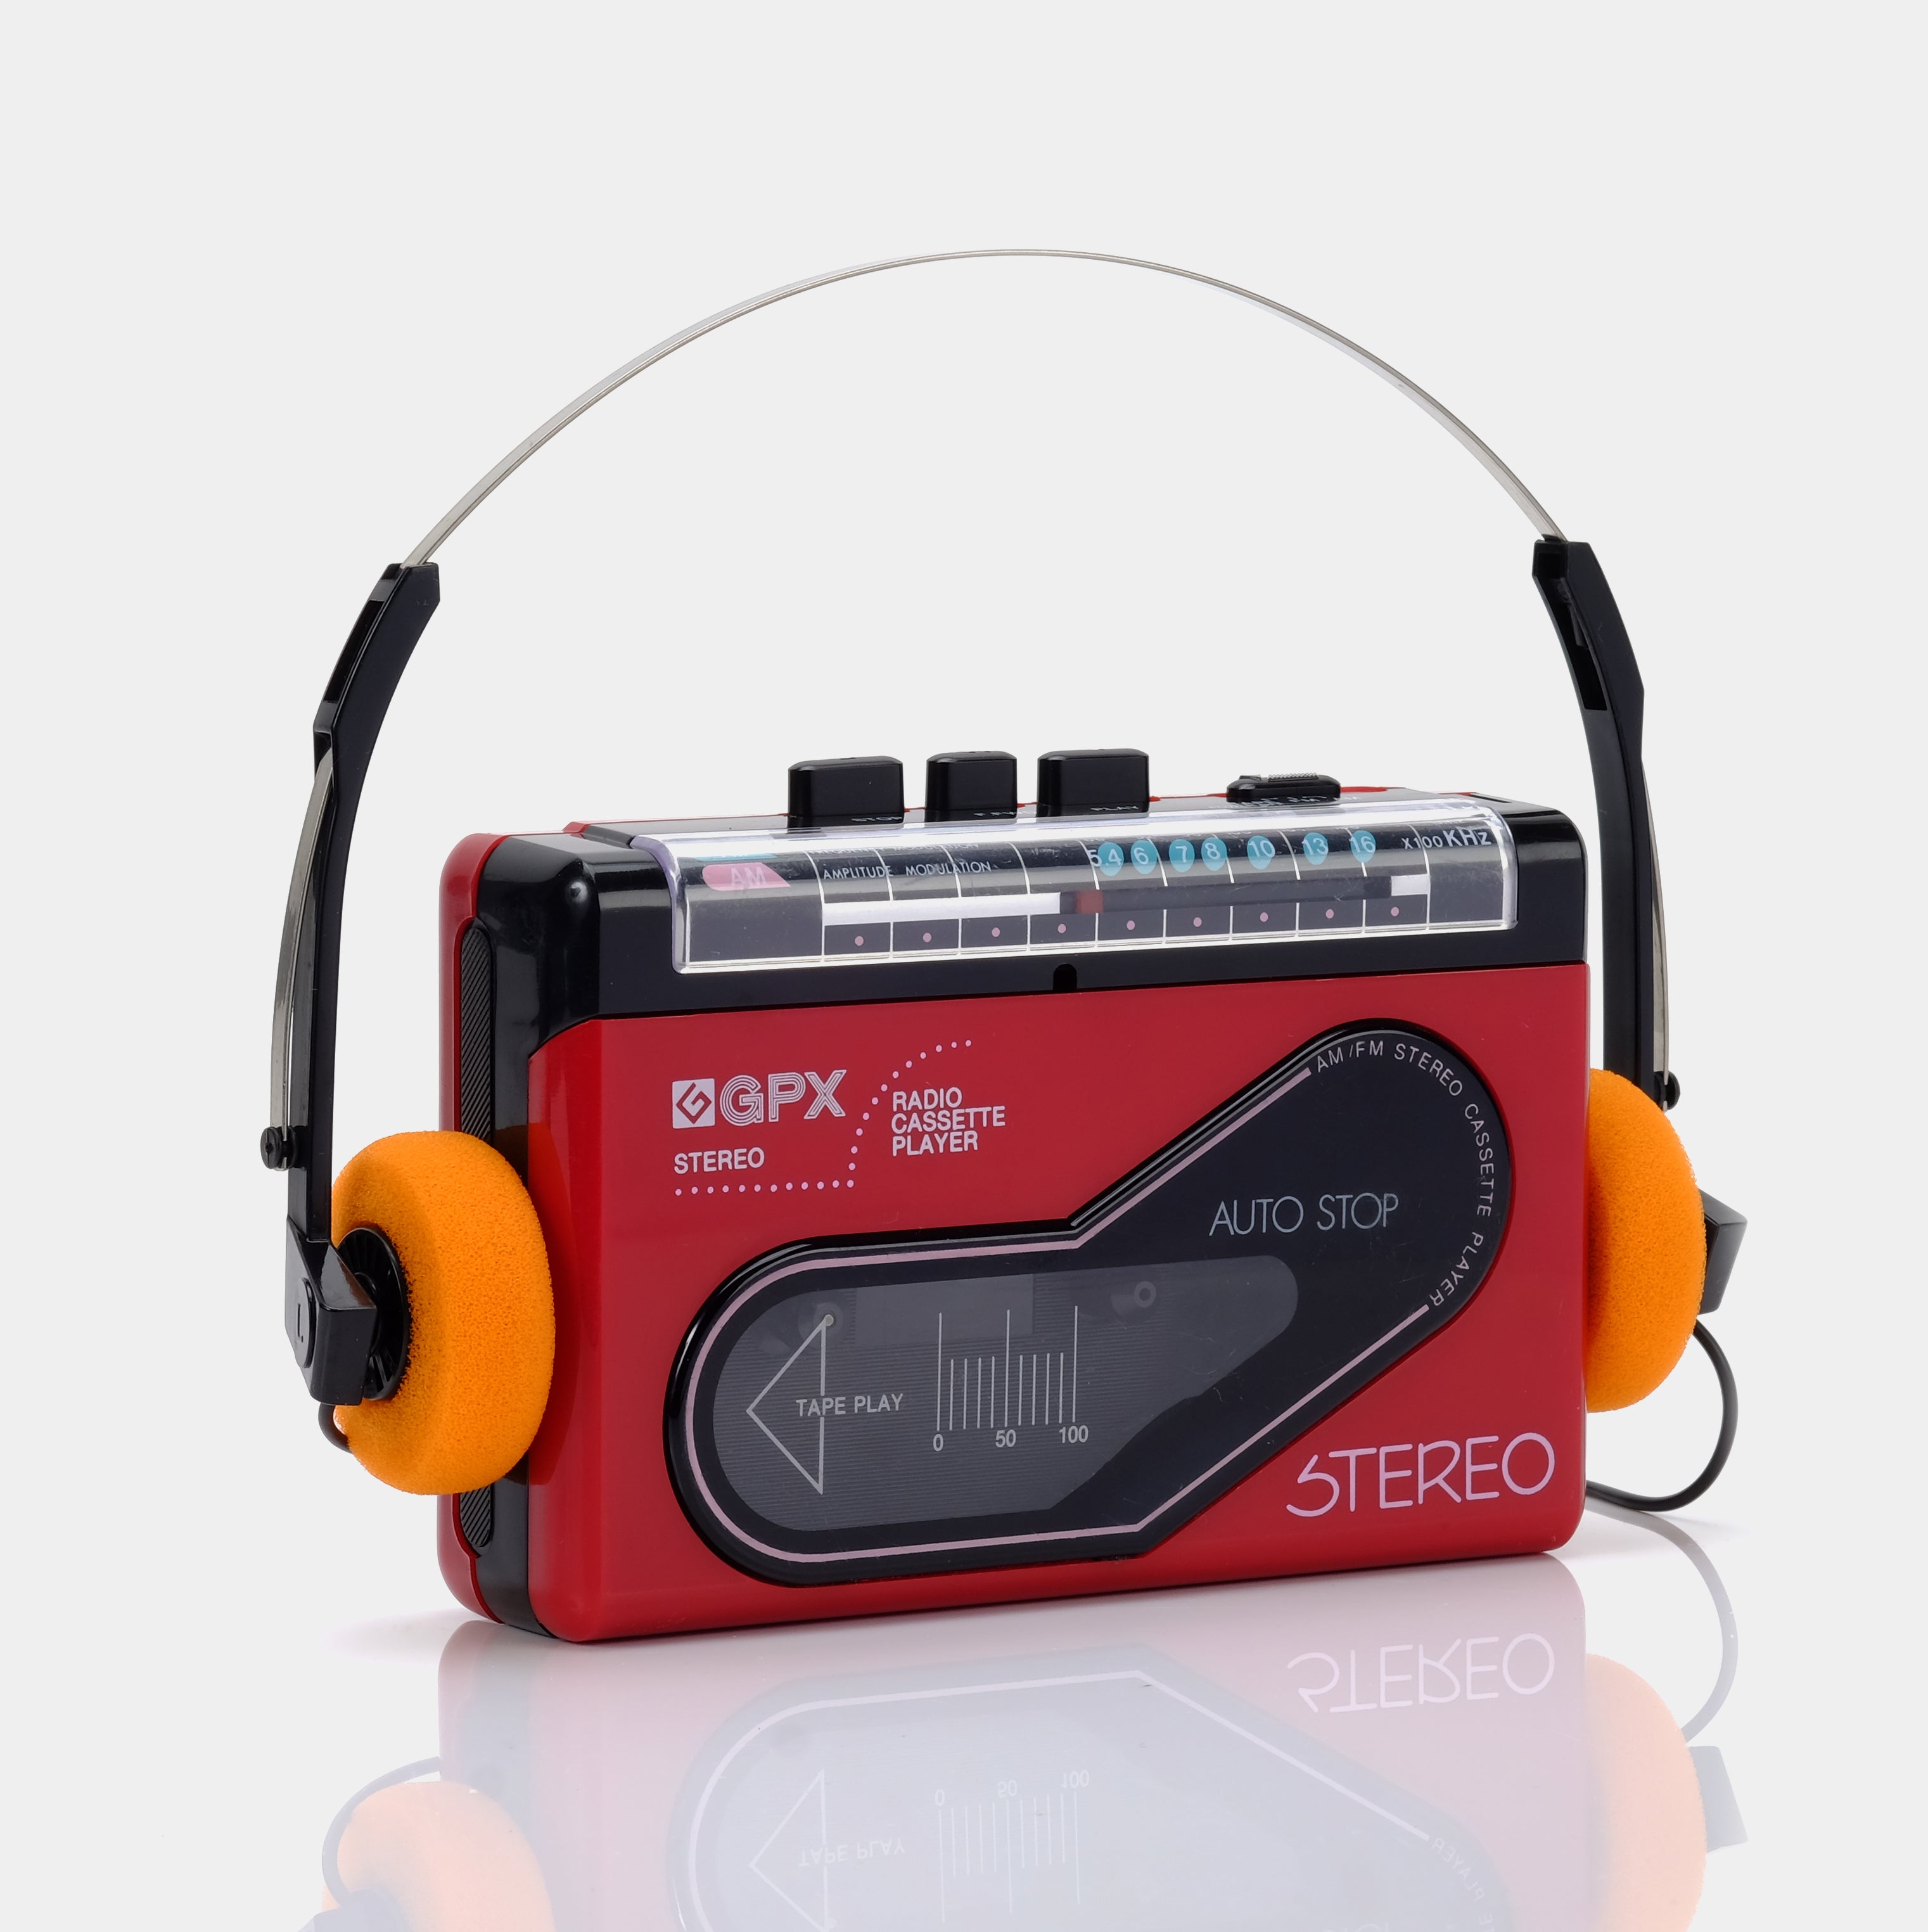 GPX Portable Stereo Boombox with AM/FM, CD, Cassette BCA209B - The Home  Depot